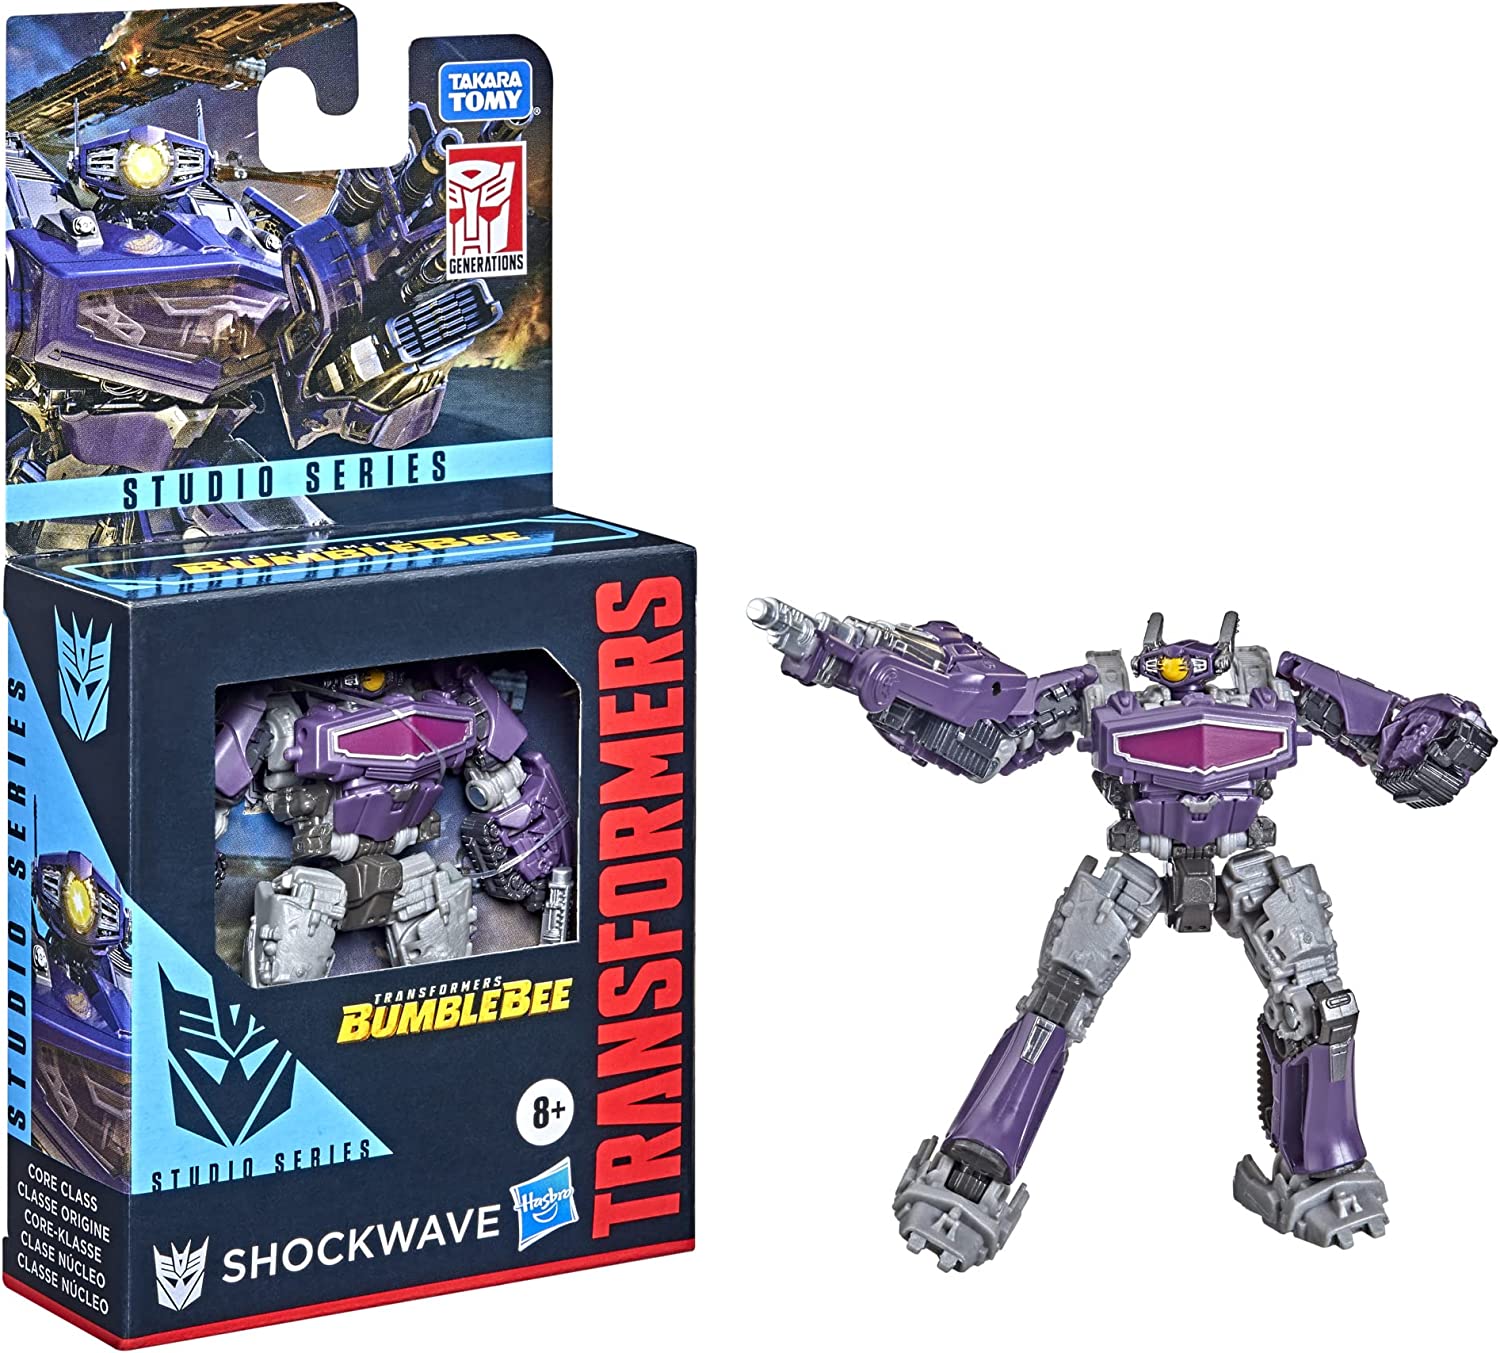 Transformers - Core Class Bumblebee Shockwave Action Figure (w/$2 coupon) $5.99